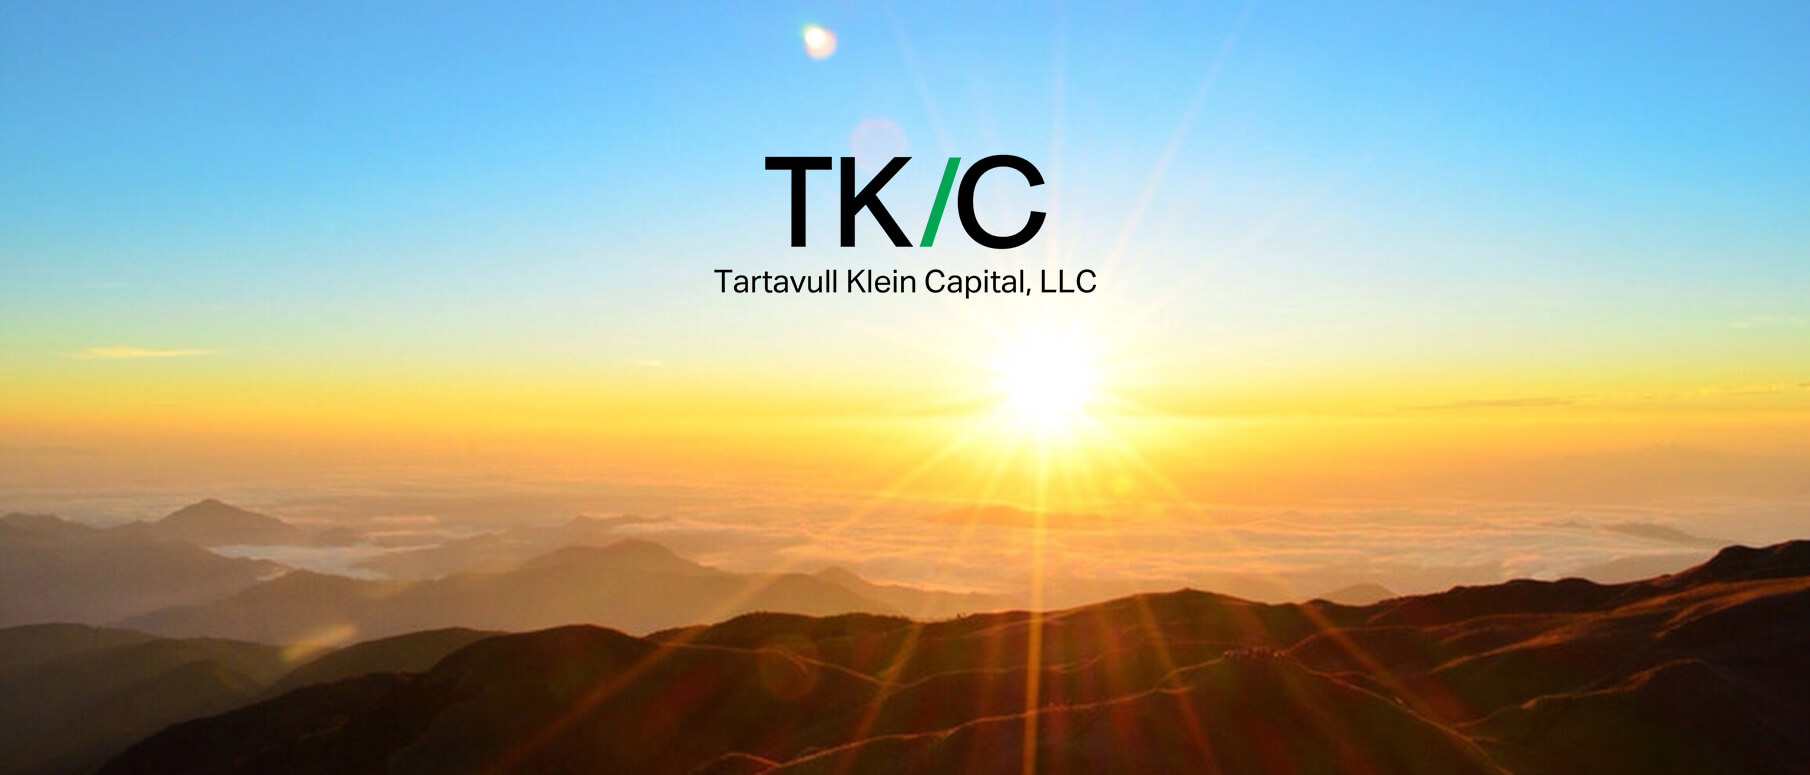 Backbone Capital Assists Tartavull Klein Capital with Acquisition